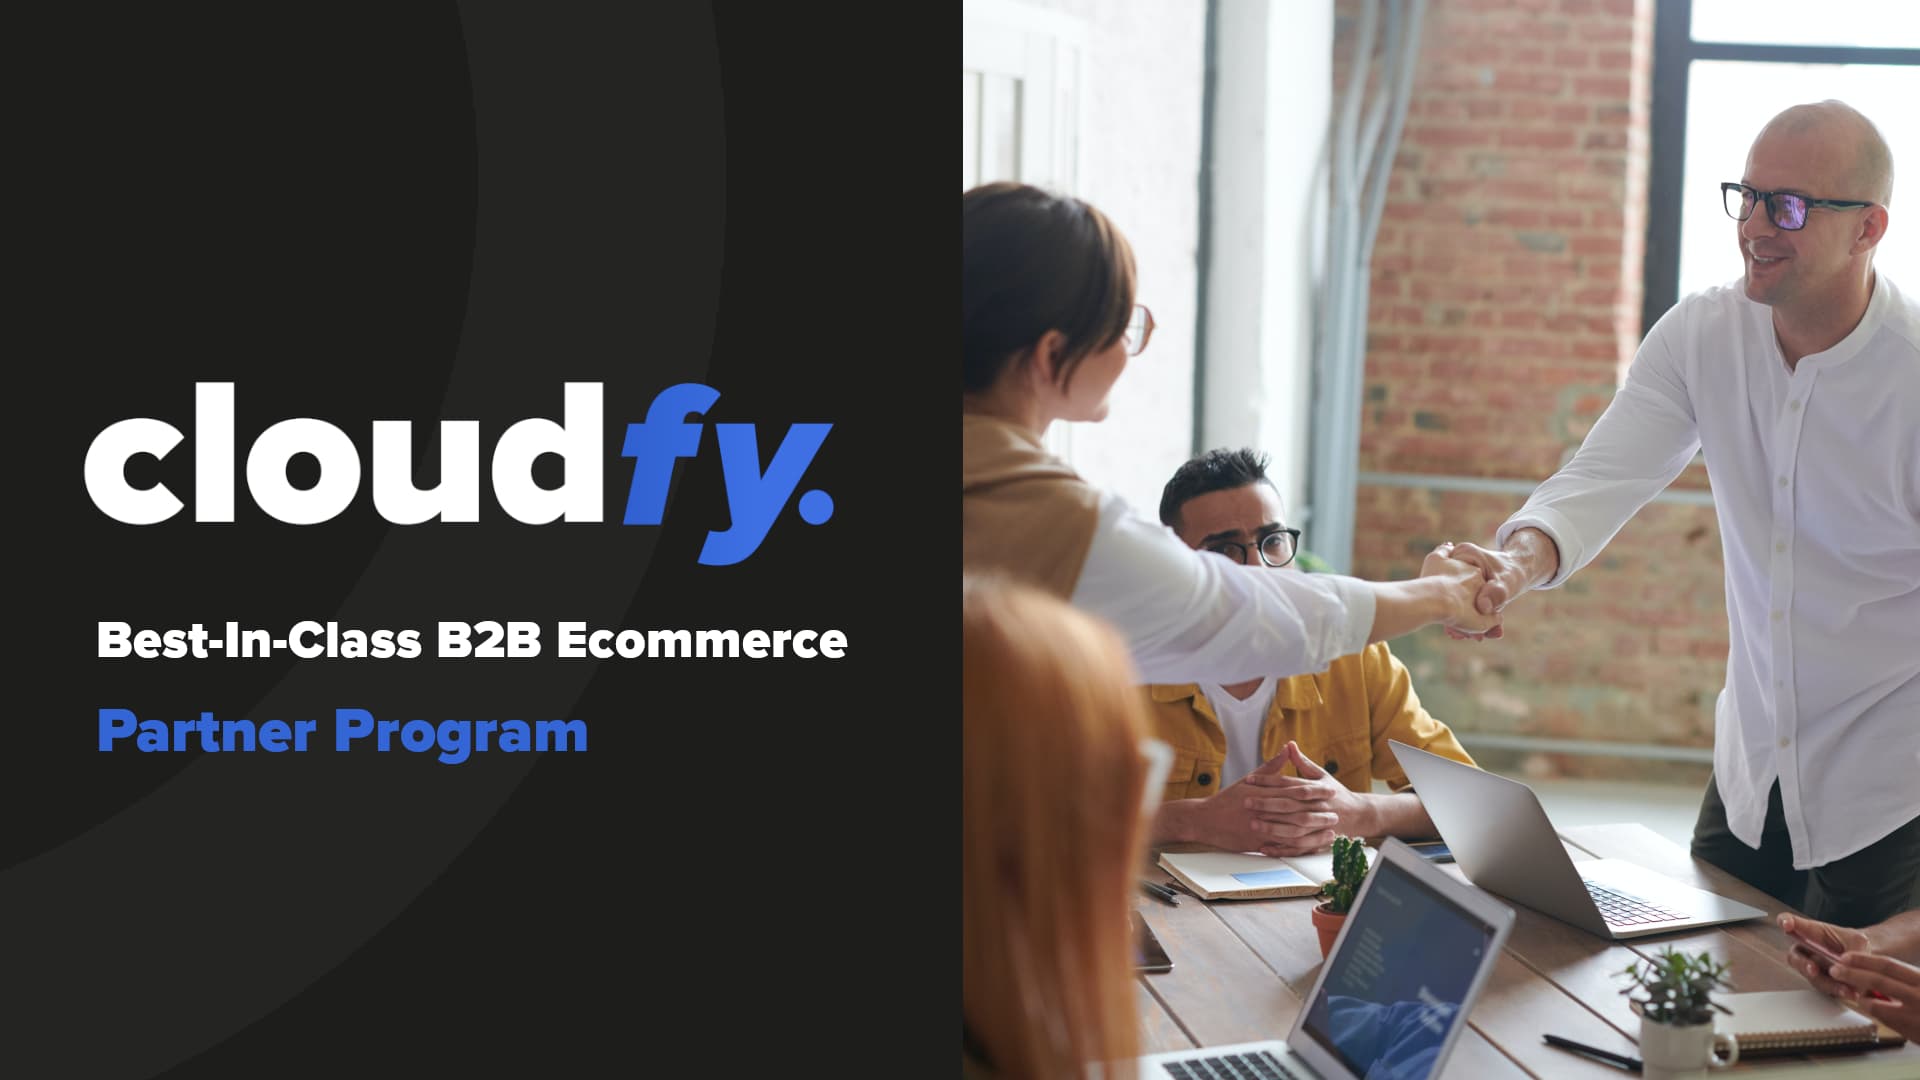 Screenshot of Youtube video about Cloudfy's partner program